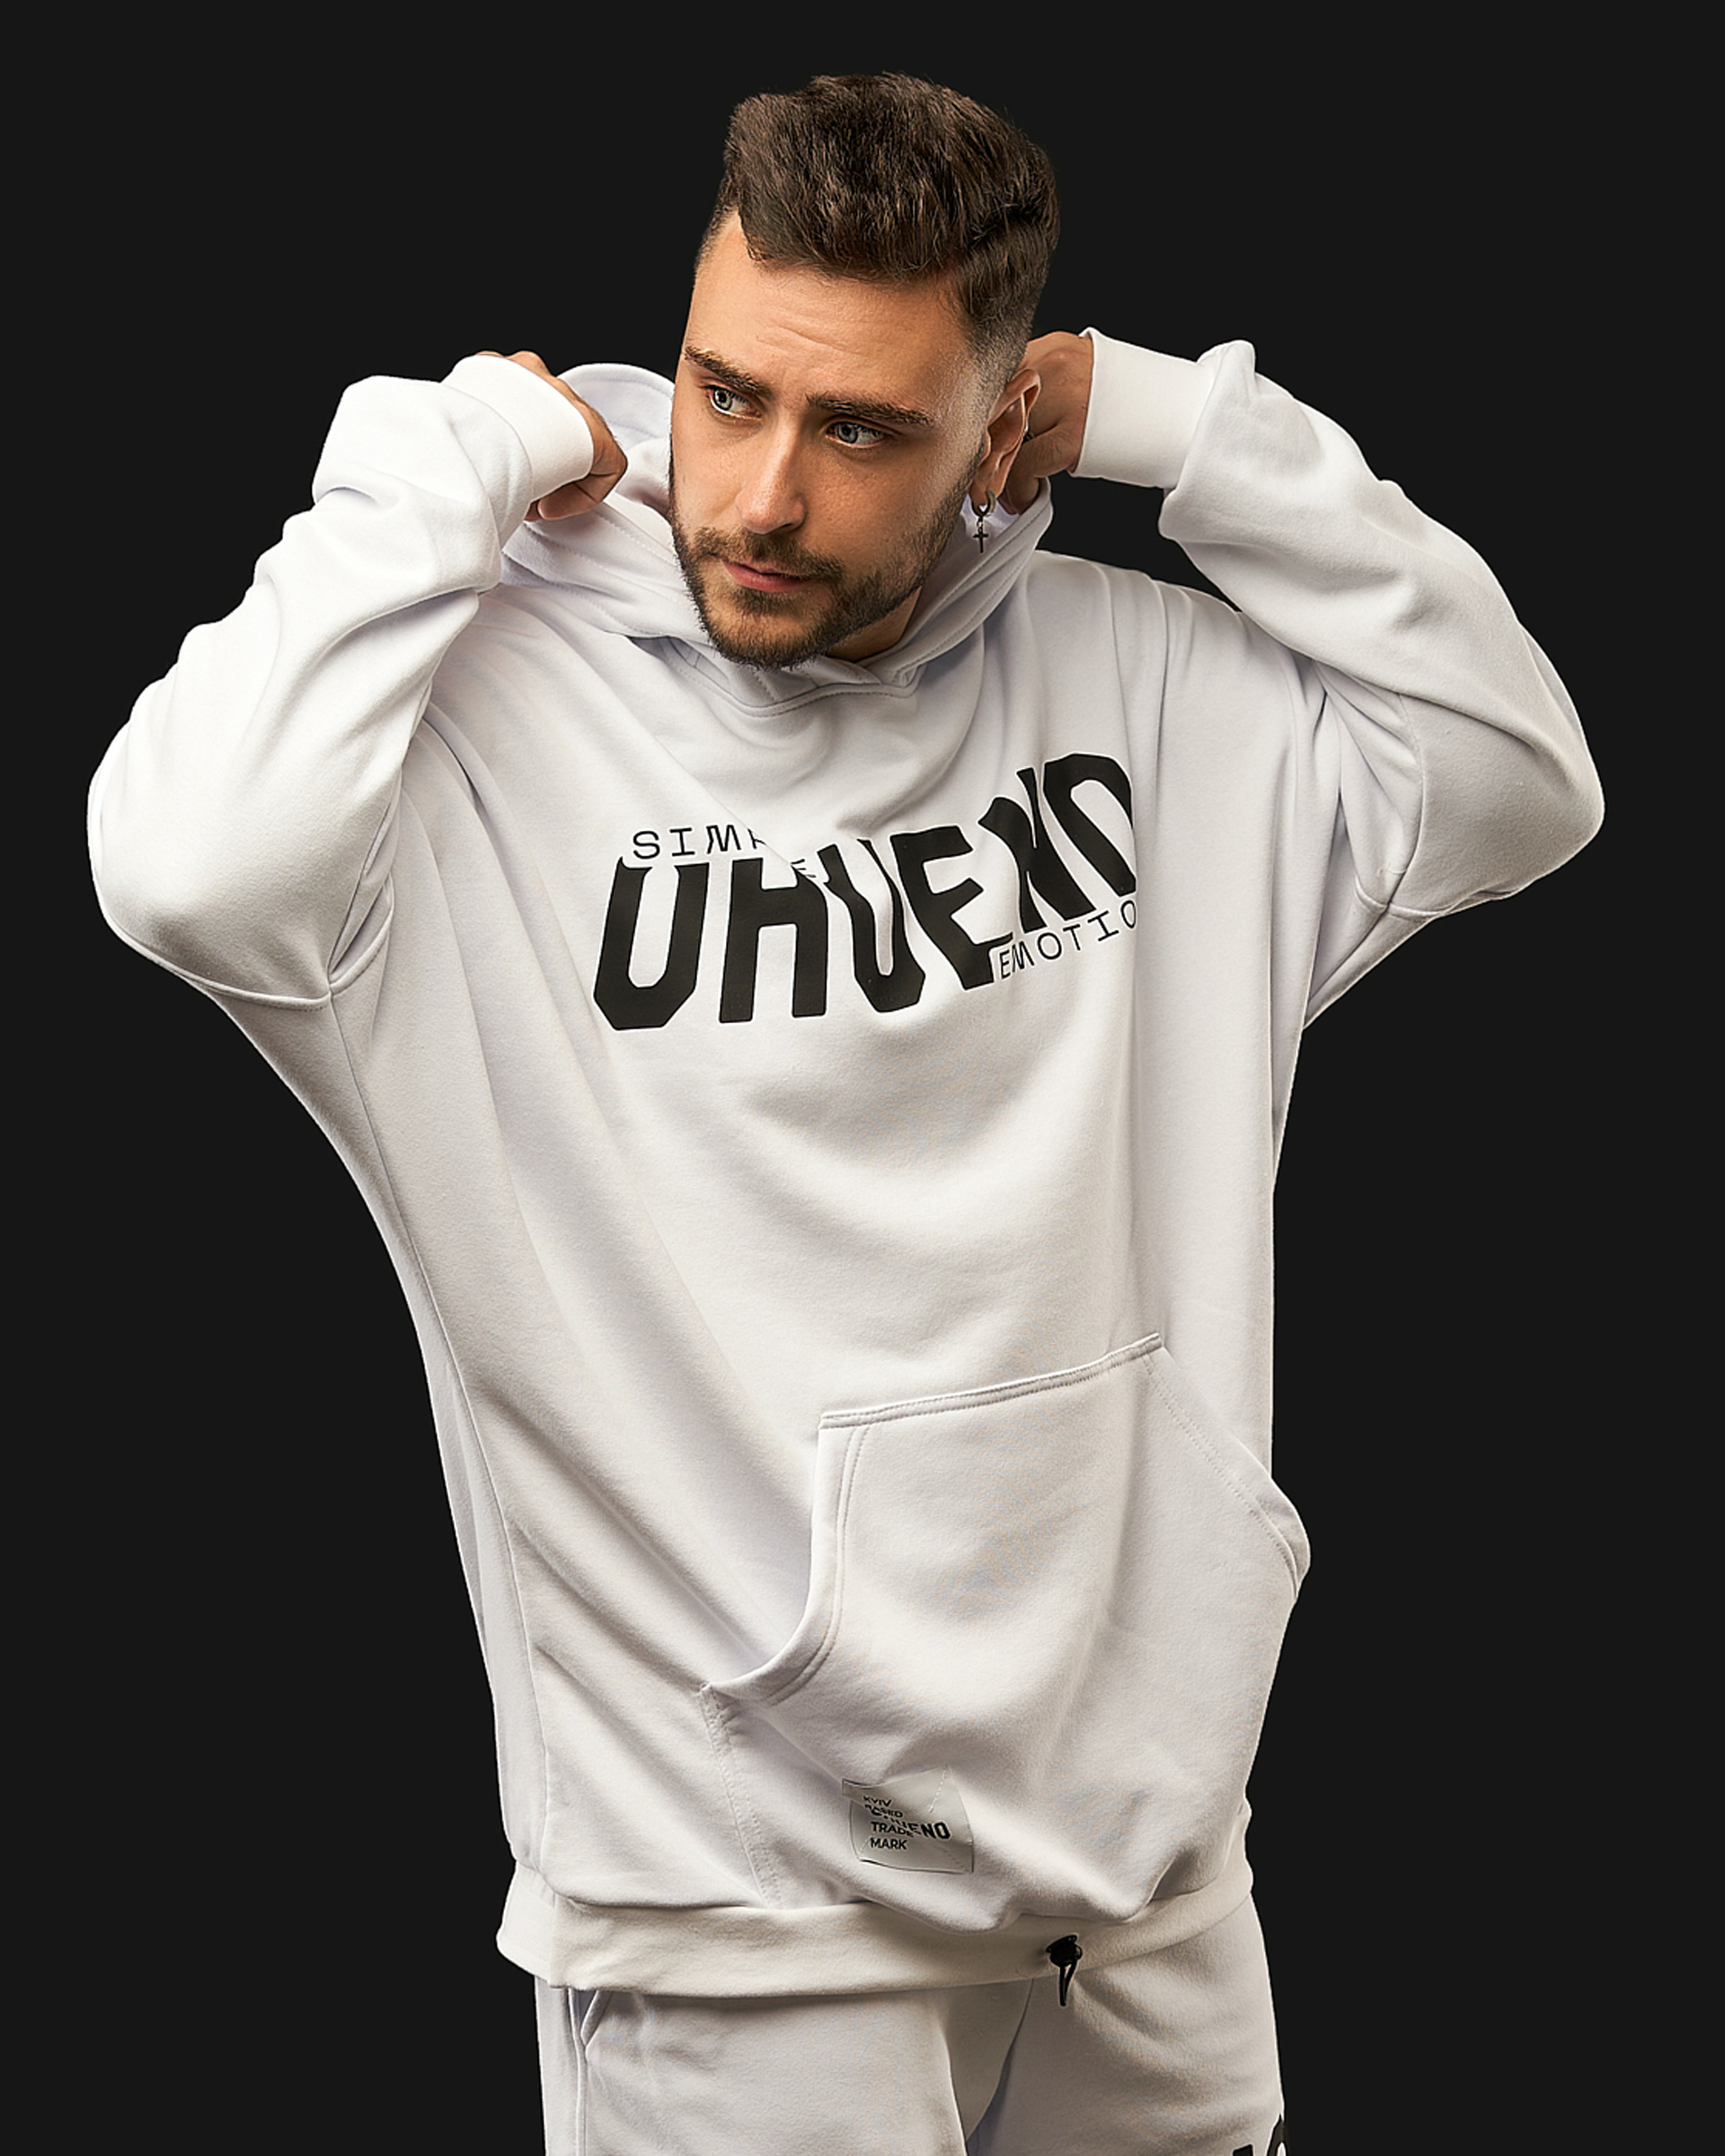 Oversized hoodie (white) Image: https://ohueno-official.com/wp-content/uploads/m01978-kopyia.jpg